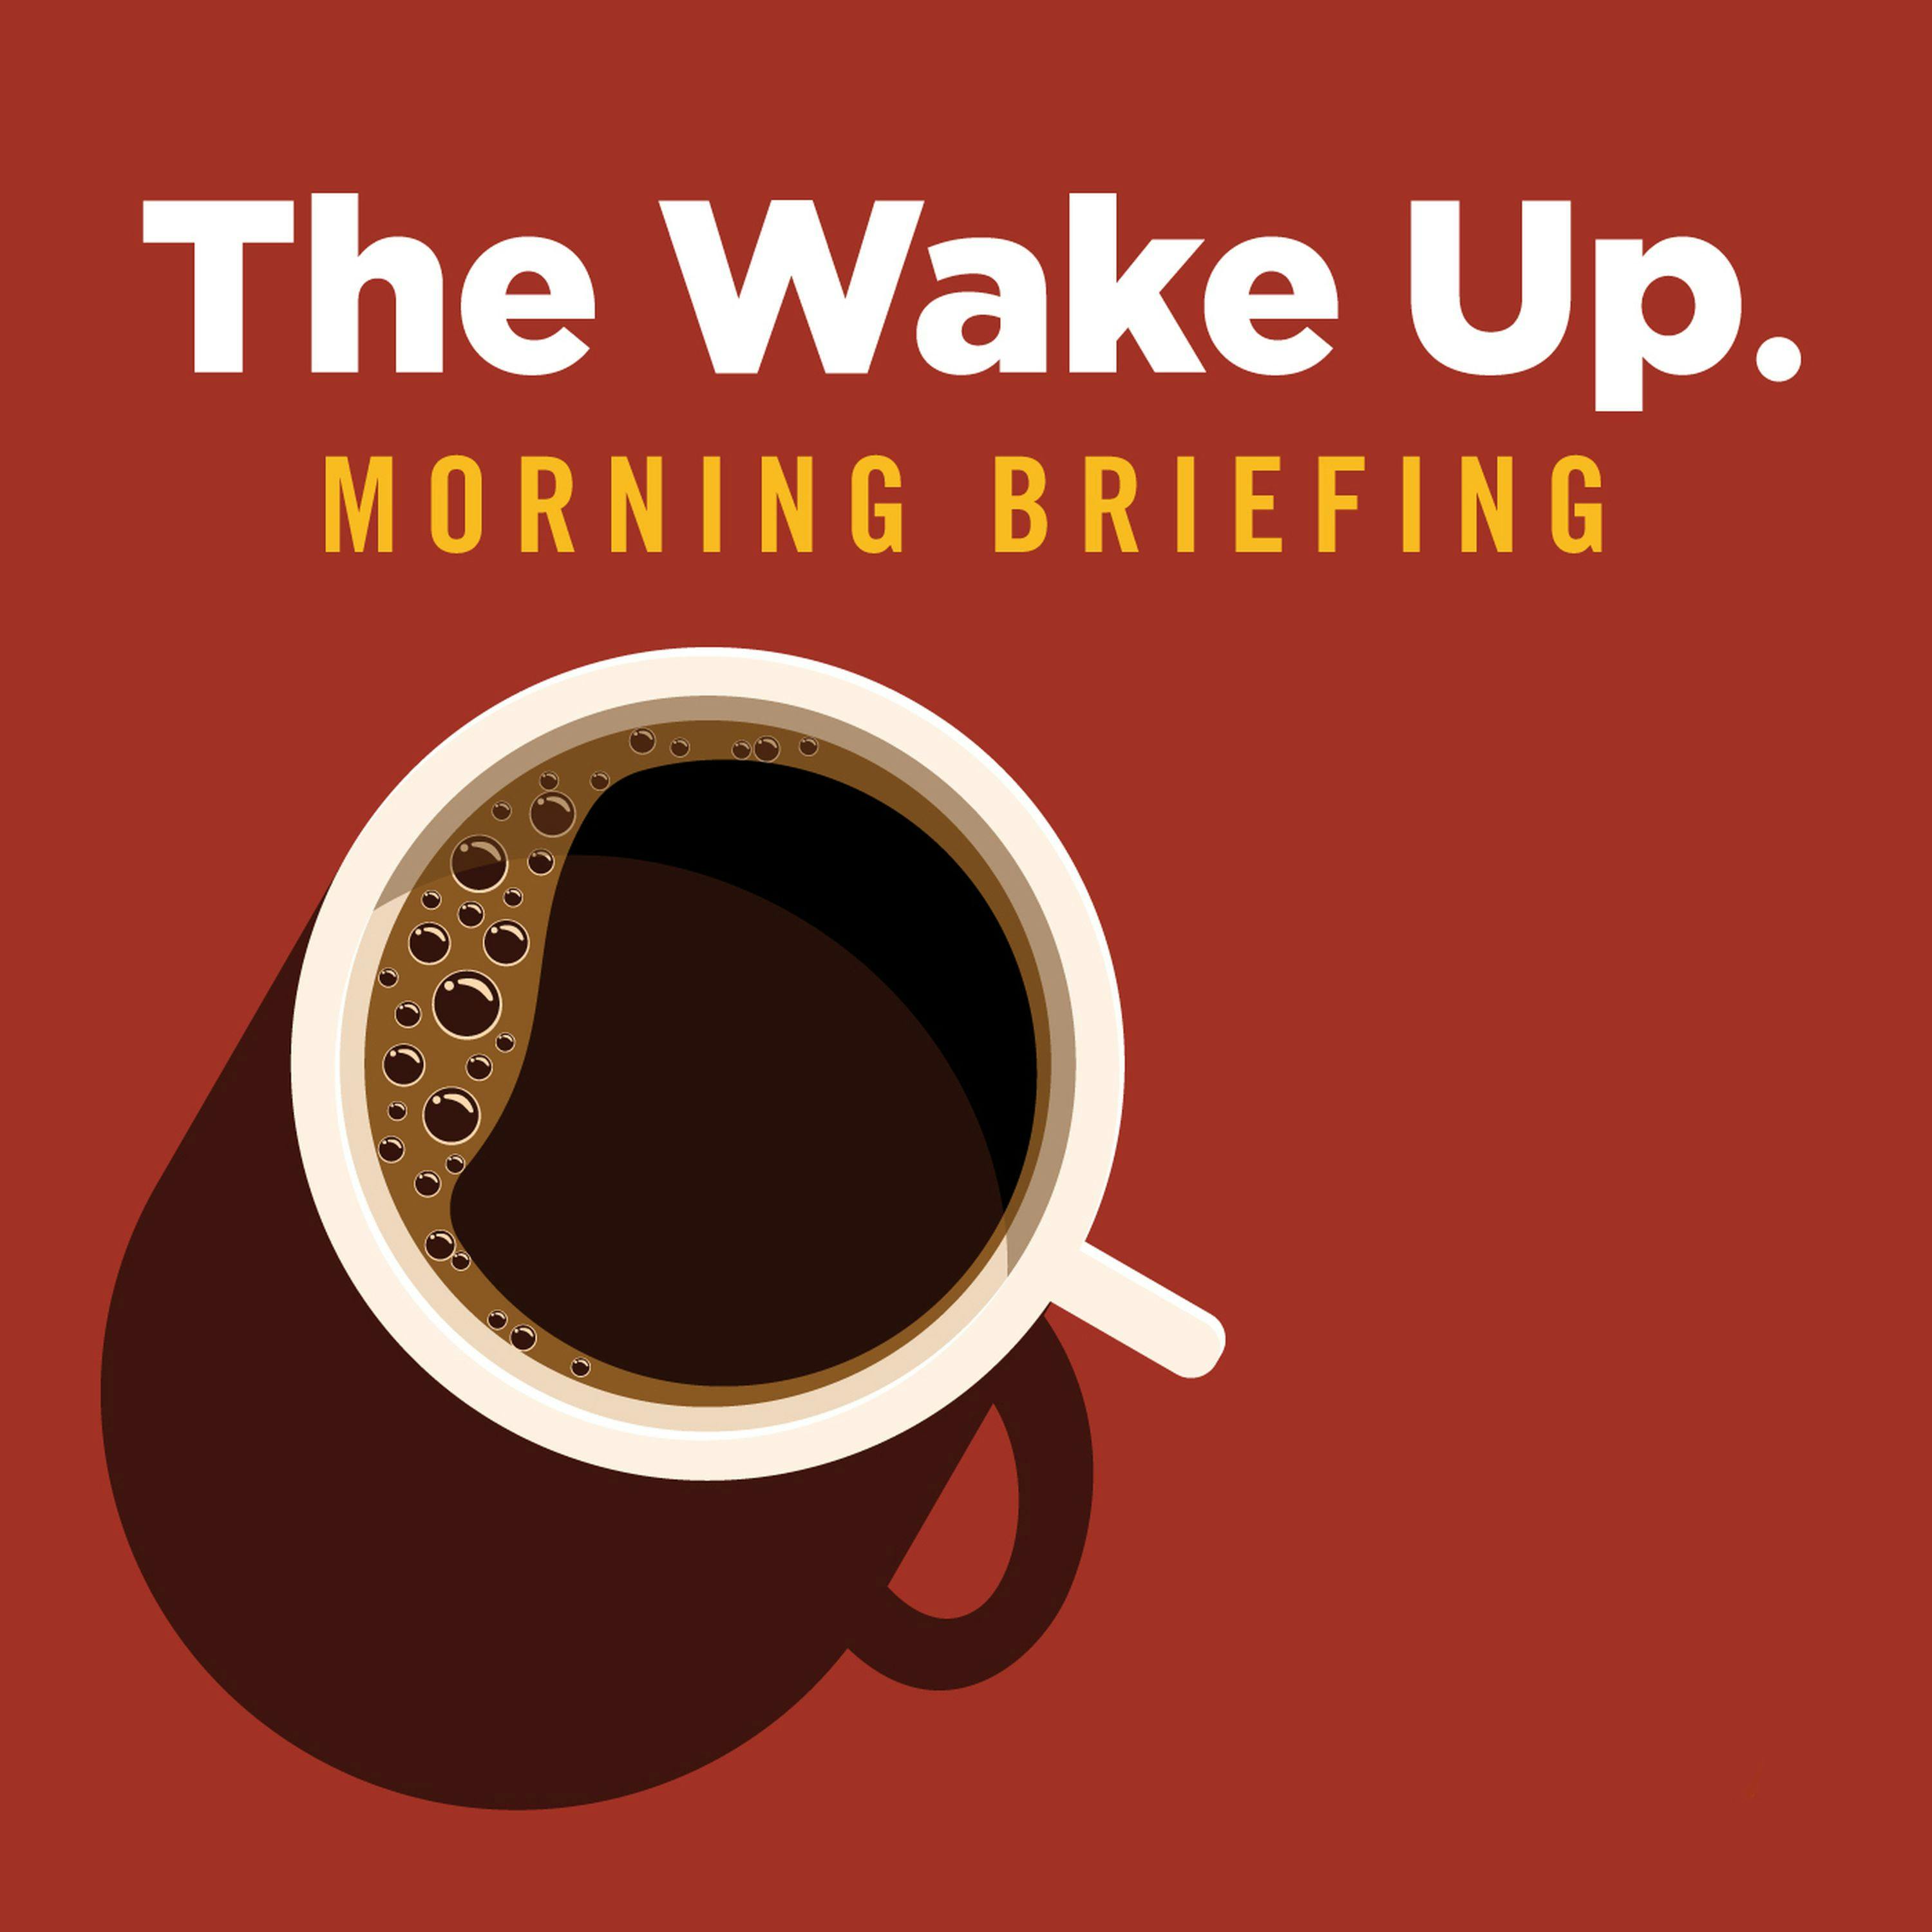 The Wake Up - July 29, 2020 -- How do you bring a presidential debate to Cleveland without involving the mayor and police?